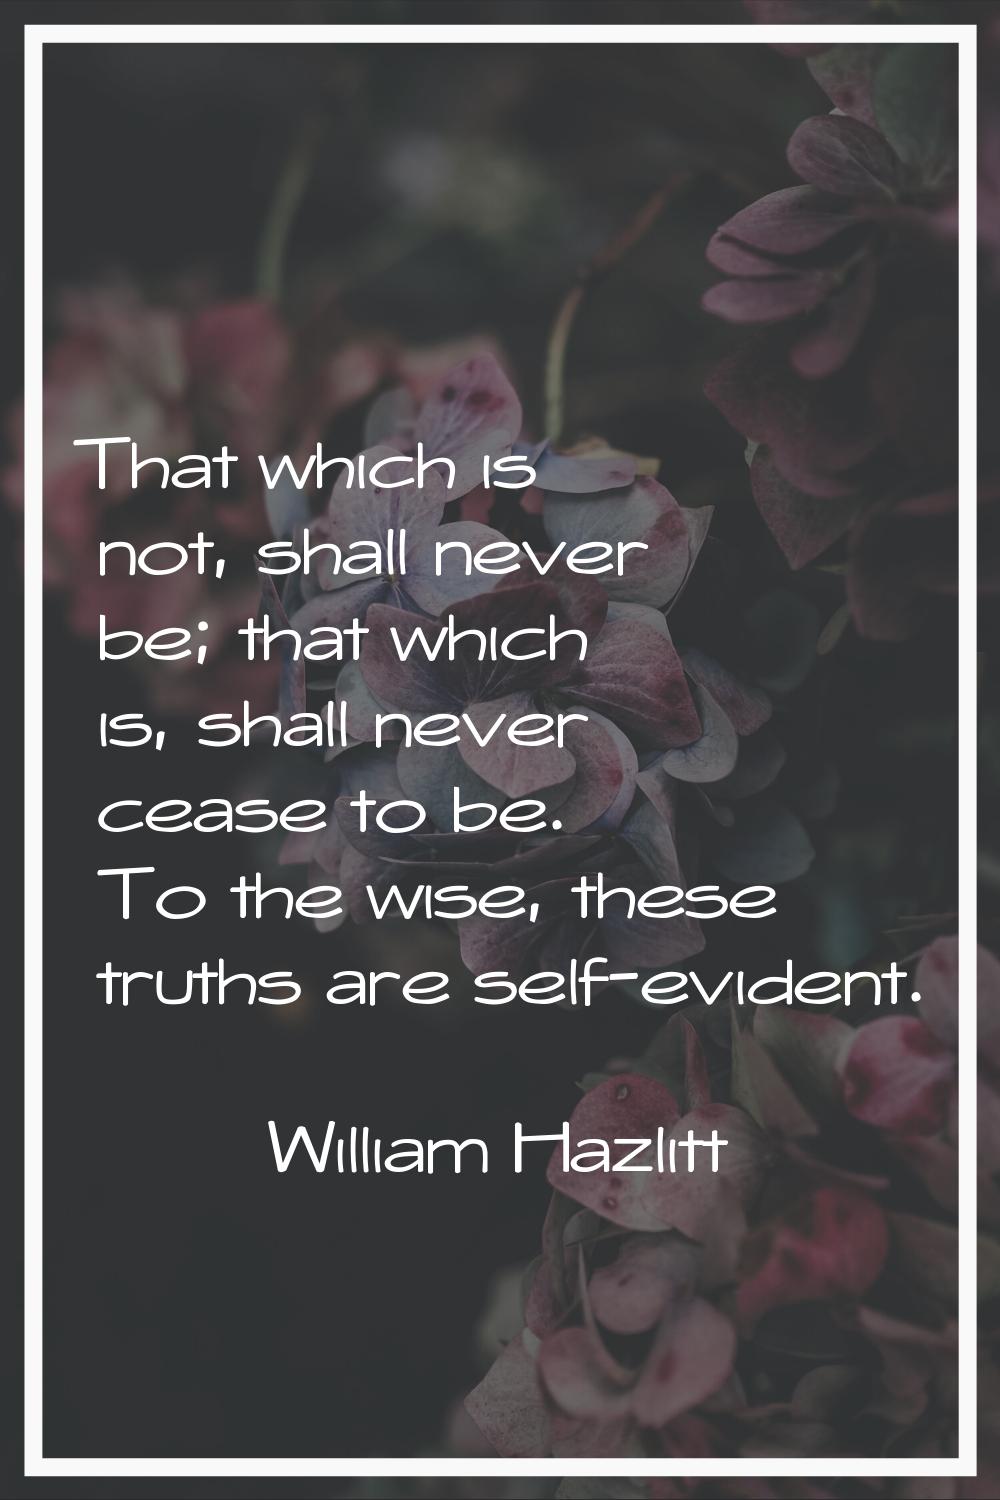 That which is not, shall never be; that which is, shall never cease to be. To the wise, these truth